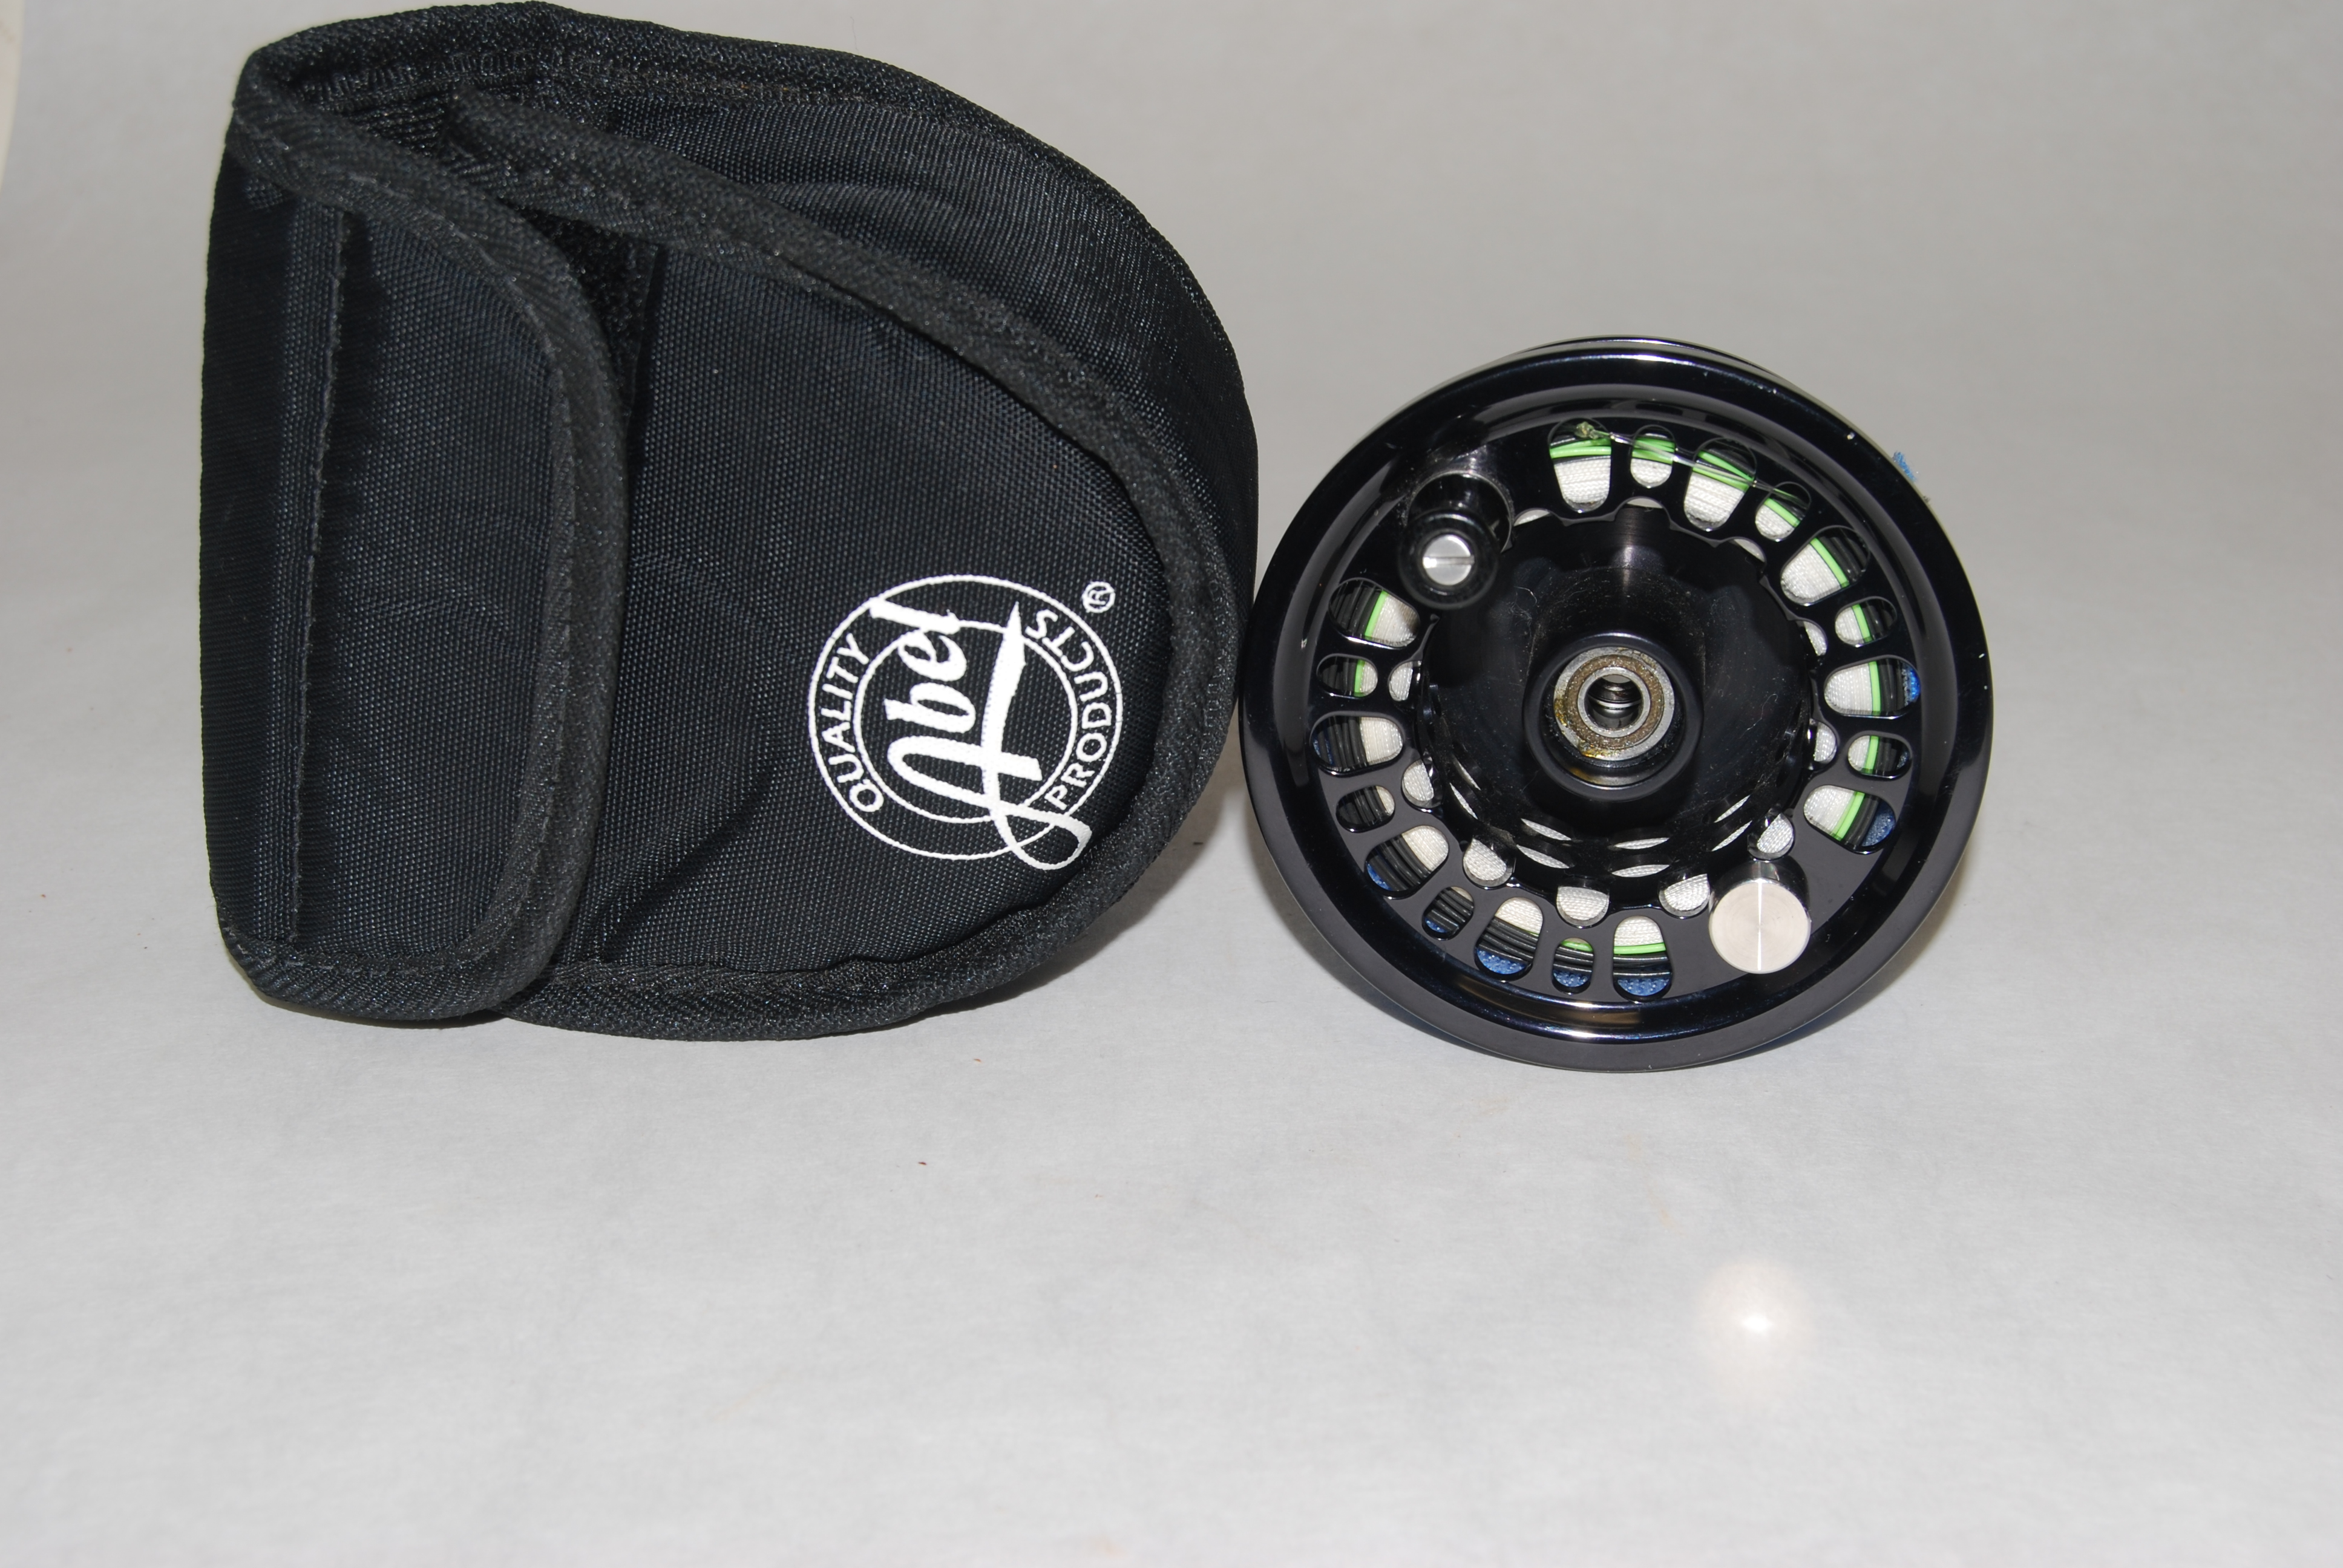 Category: FLY REELS MODERN & CLASSIC